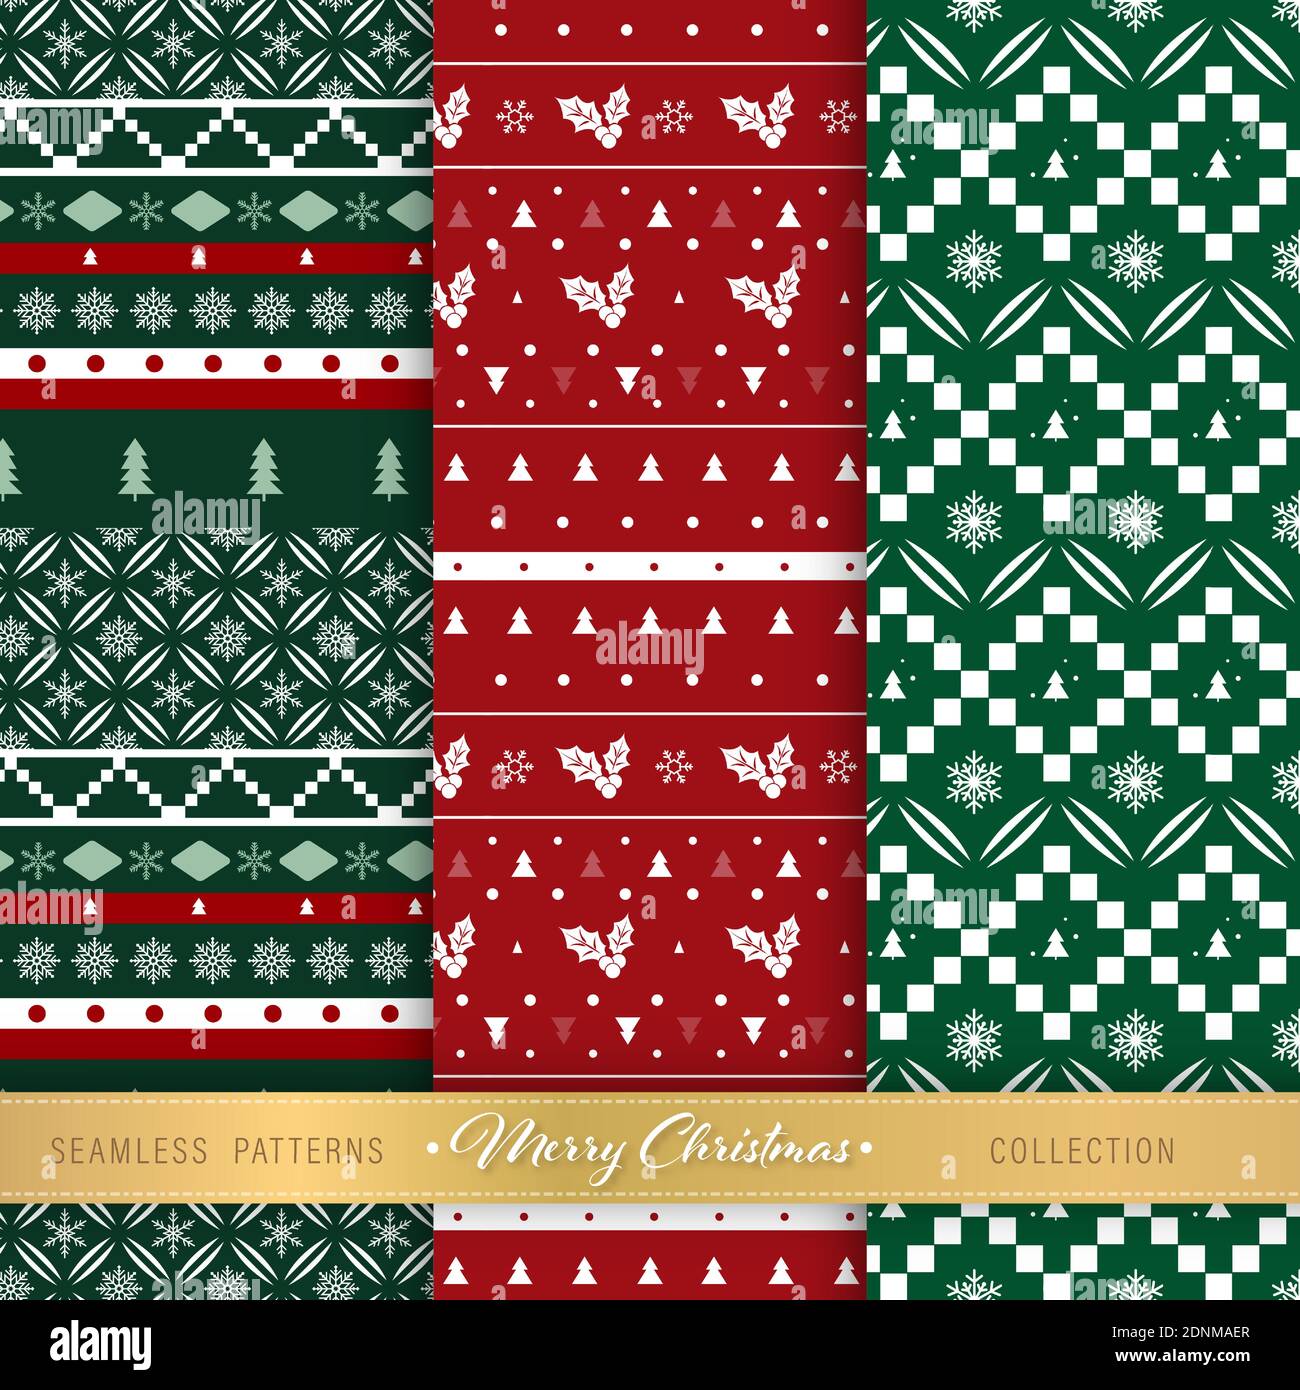 Christmas ugly sweater seamless patterns bundle set of 3 designs Stock Vector